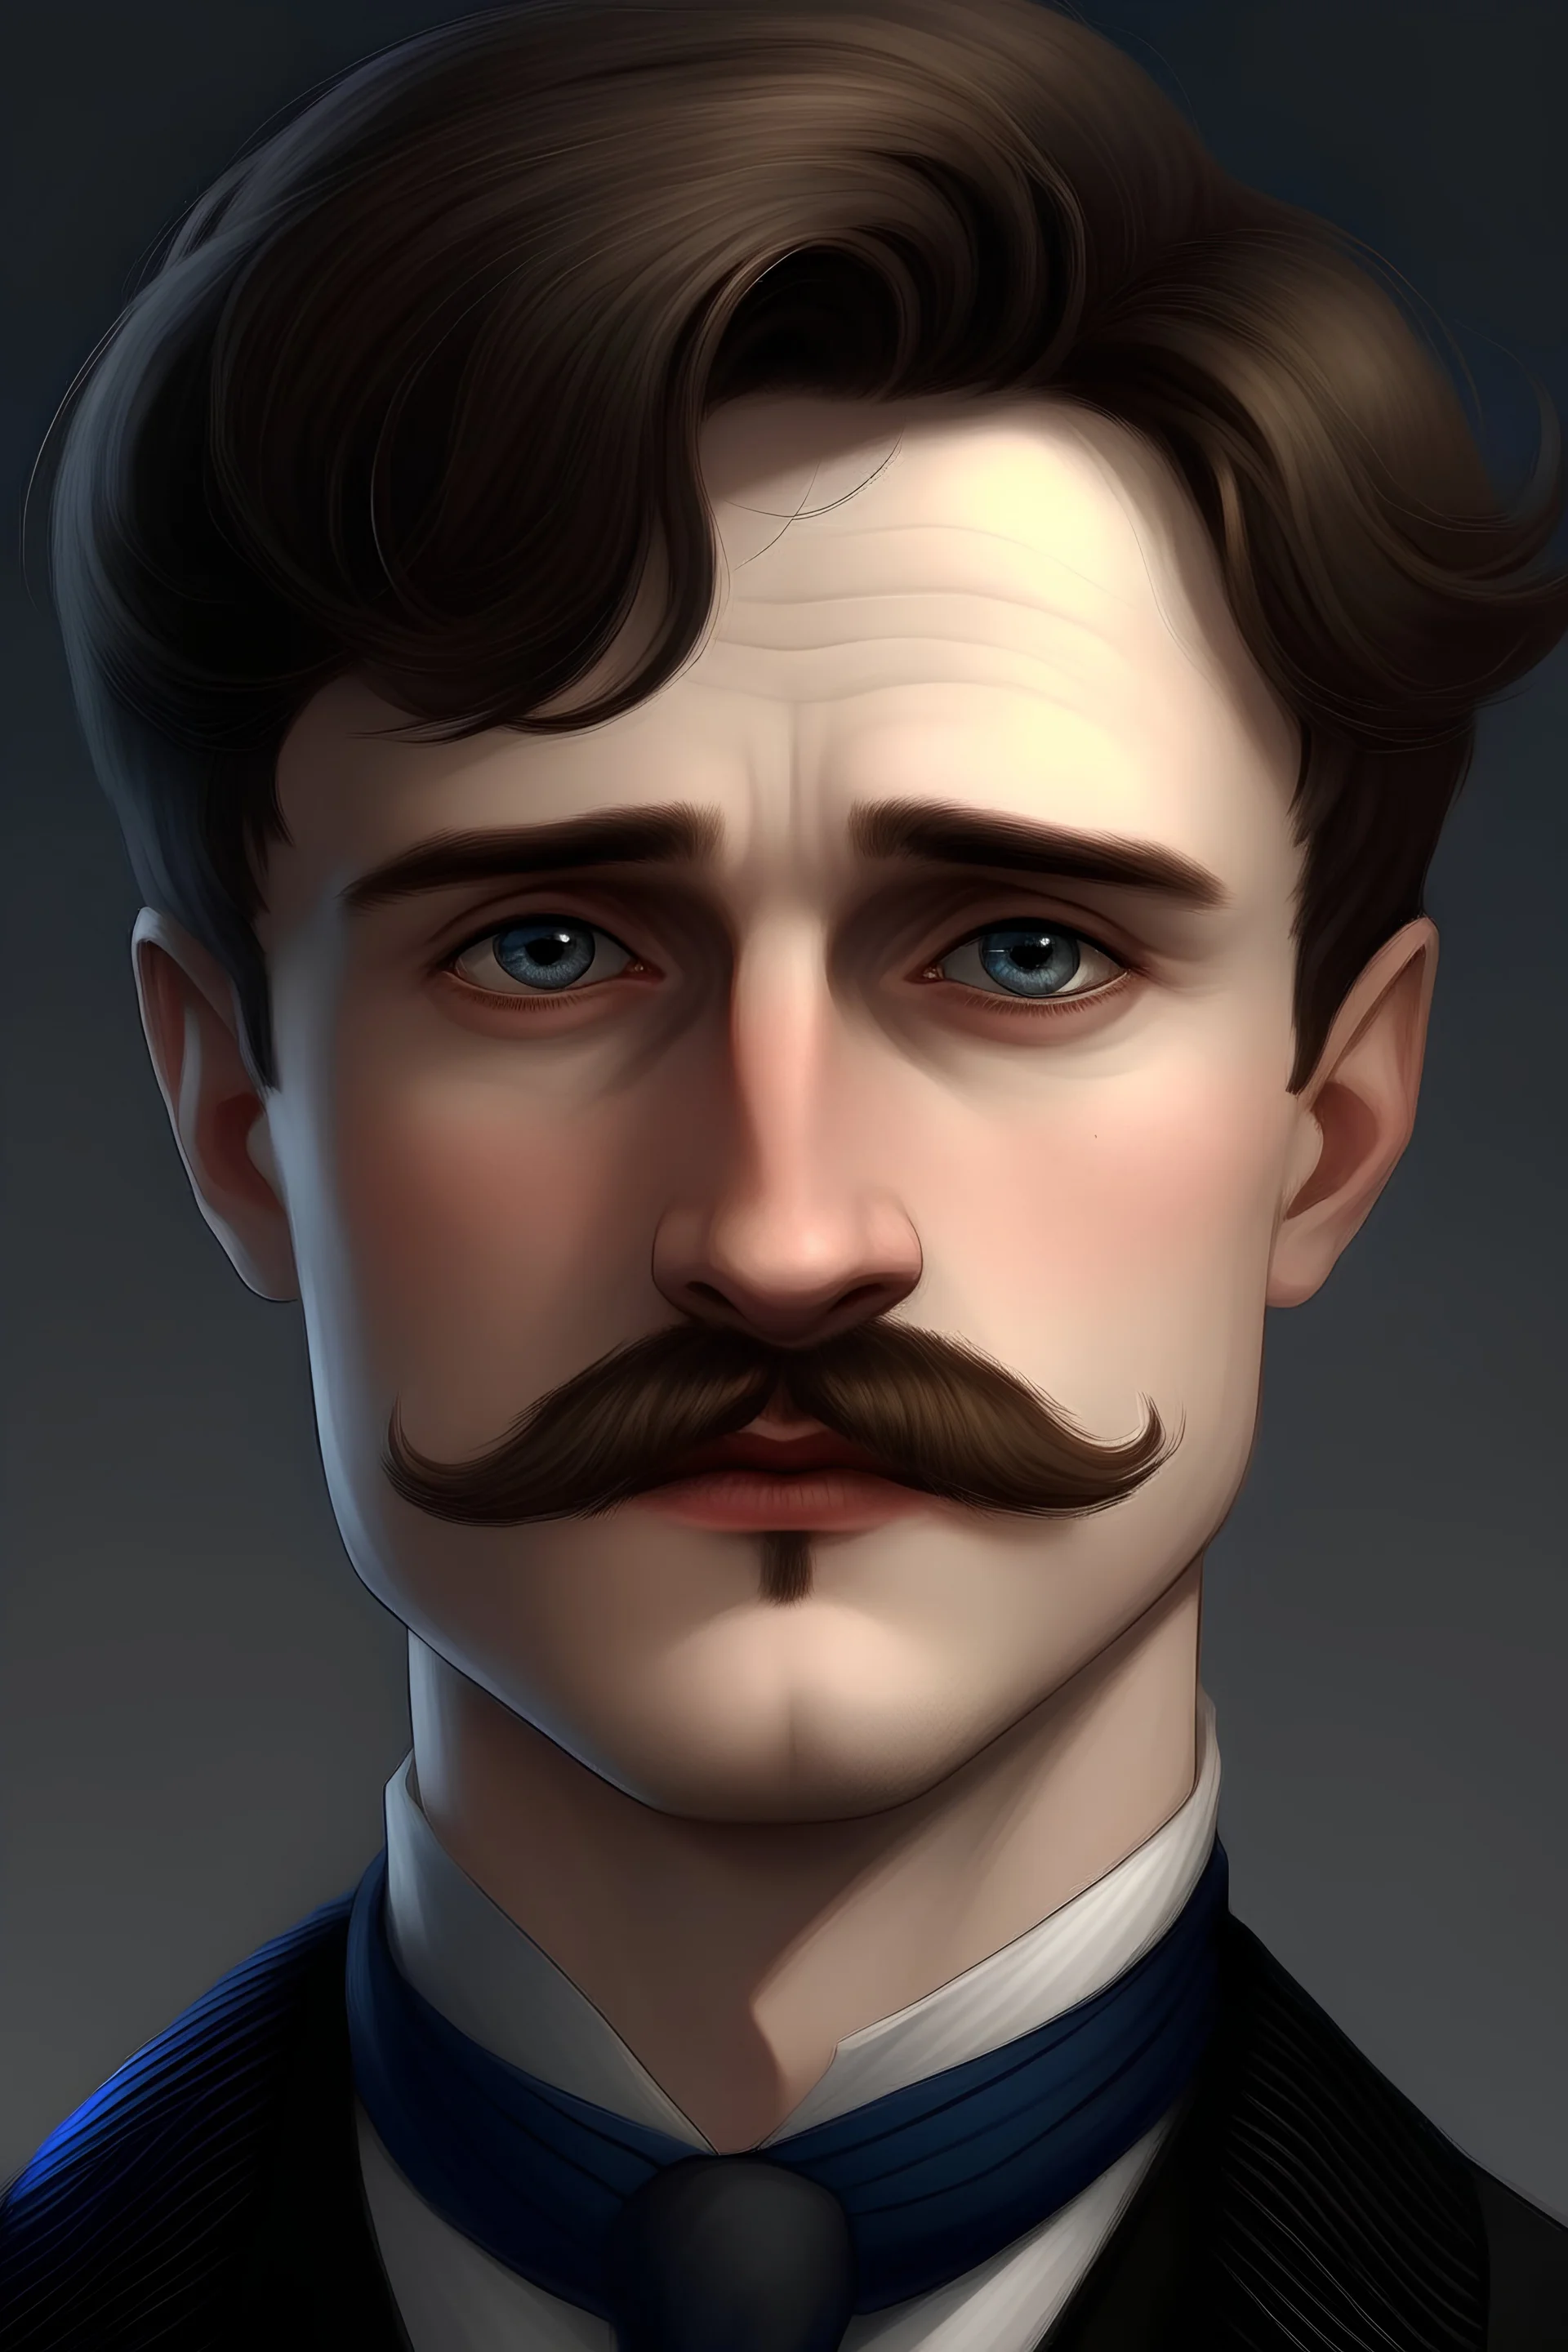 Edward is a young man on the taller side with weary blue eyes and short brown hair, well trimmed moustache and a small cut on his lip., realistic grimdark